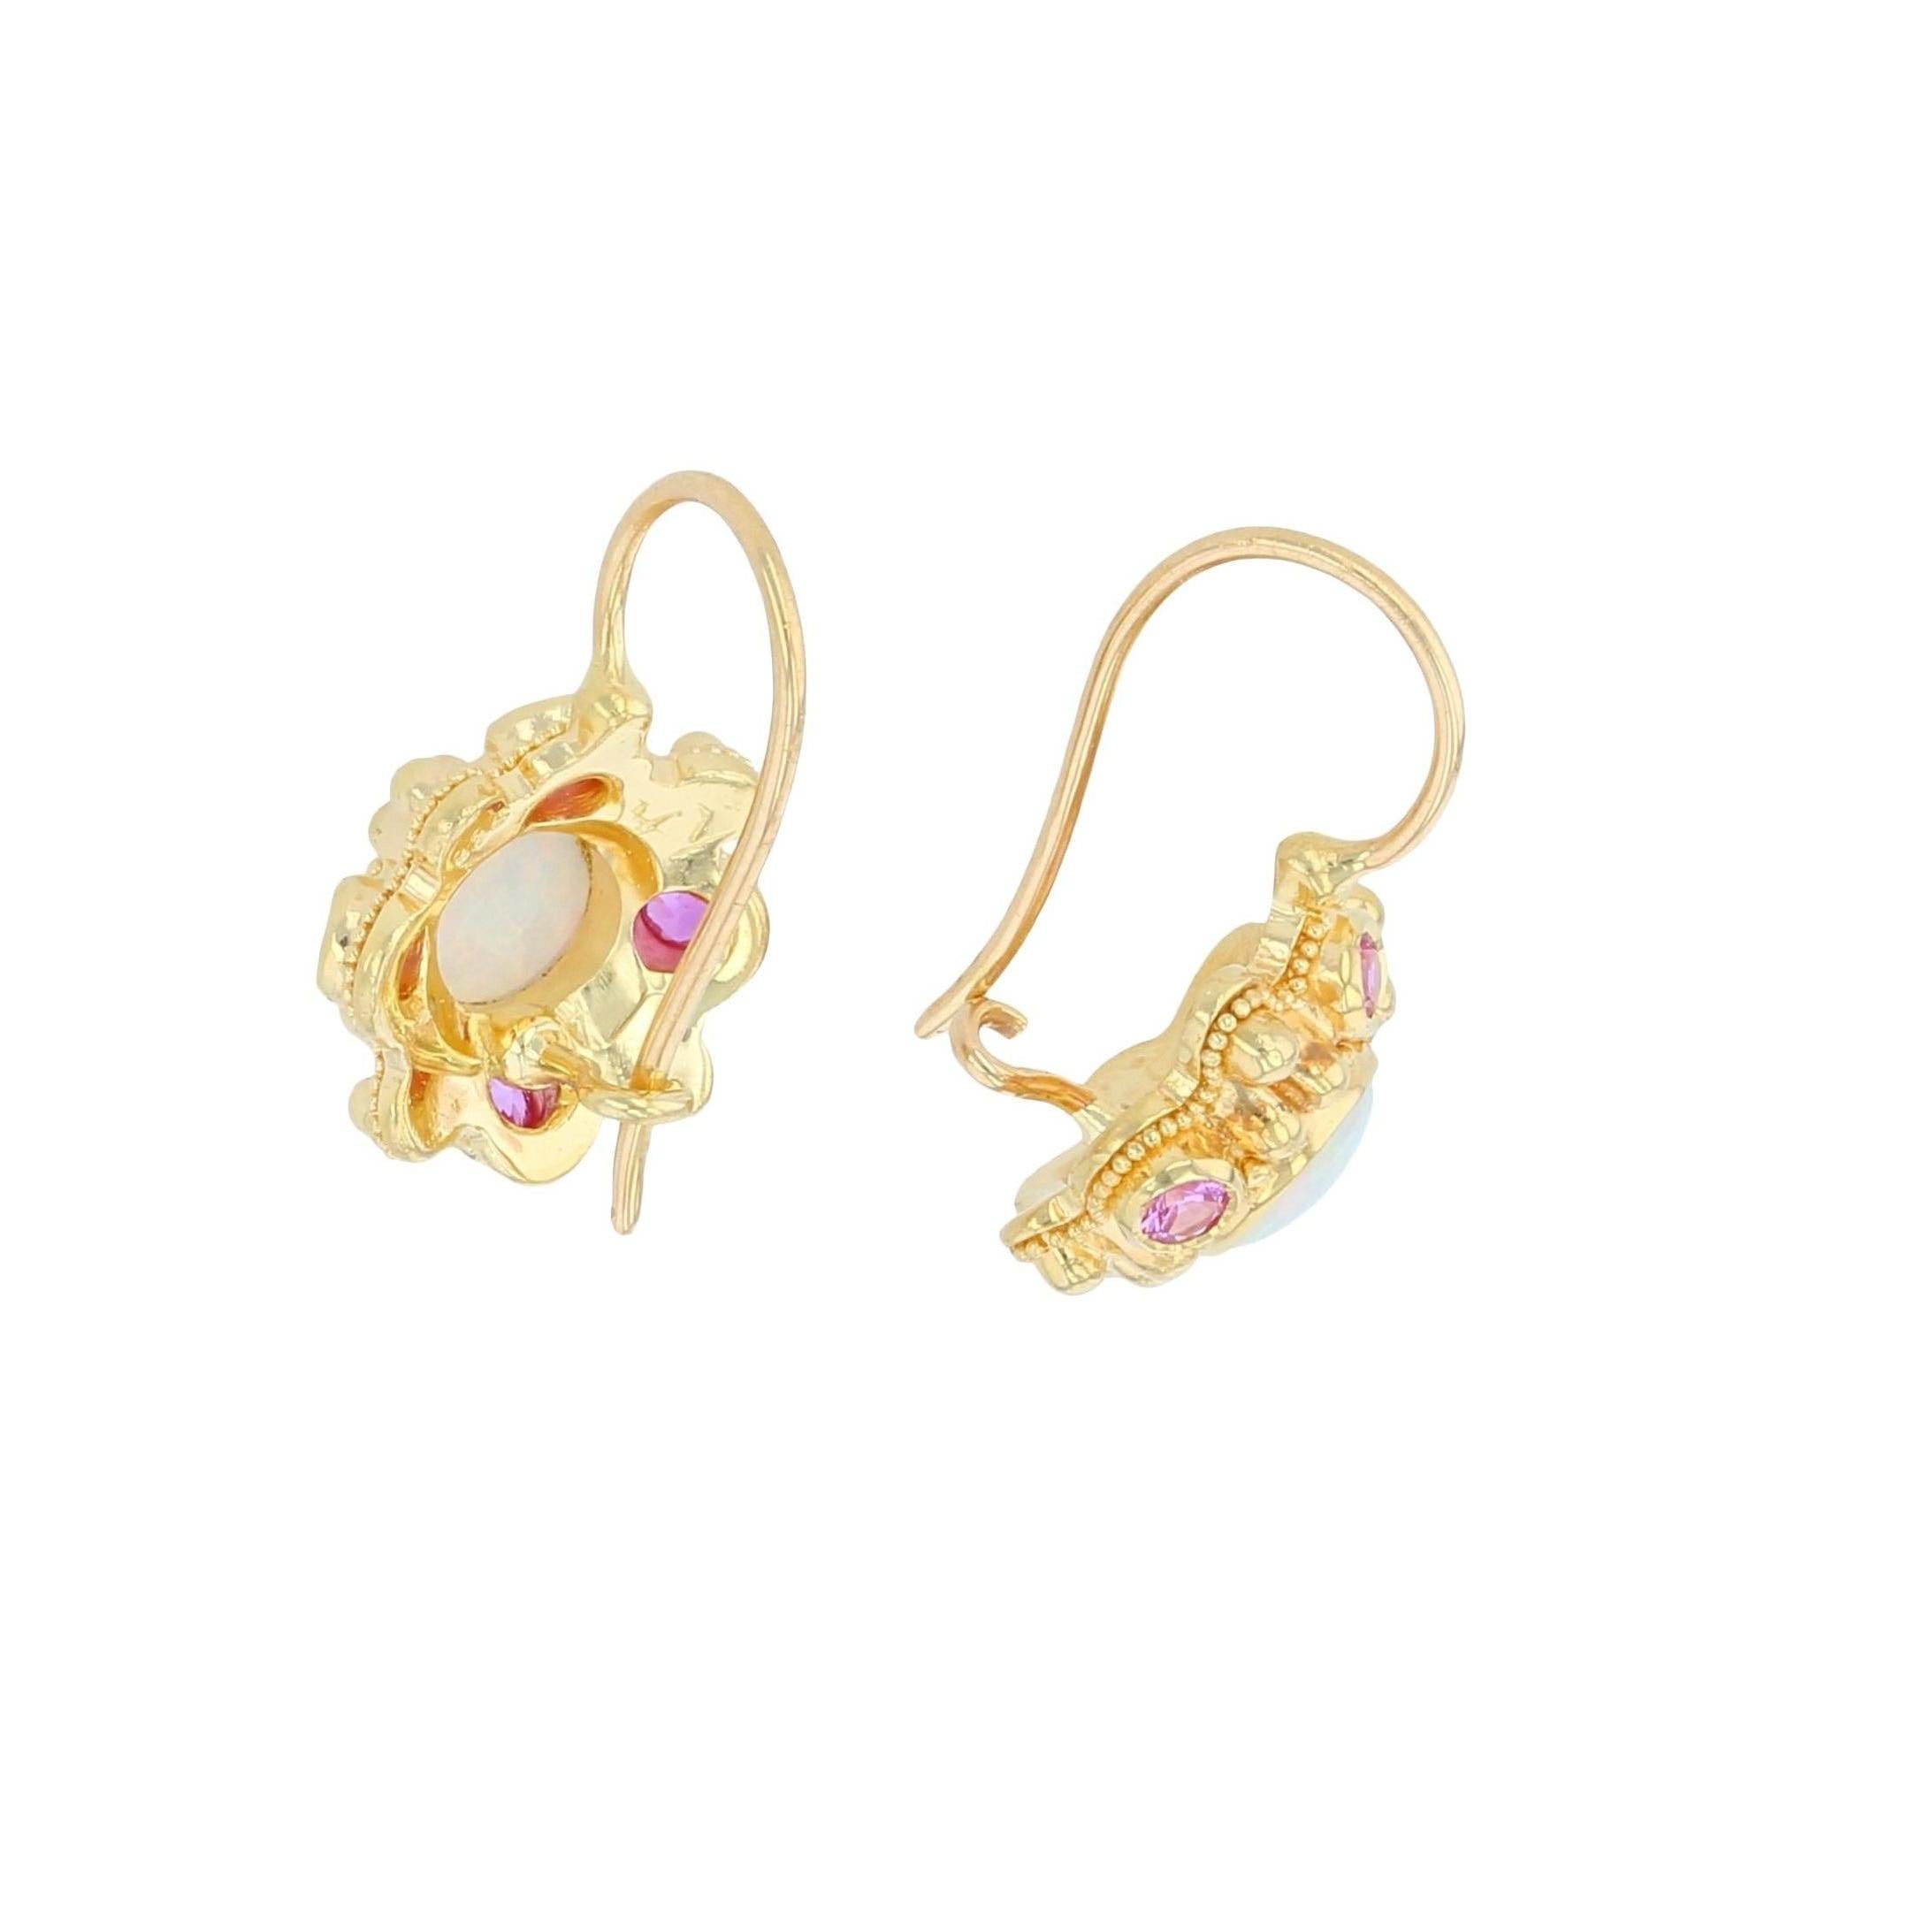 Kent Raible 18 Karat Gold Opal and Pink Sapphire Drop Earrings with Granulation 4